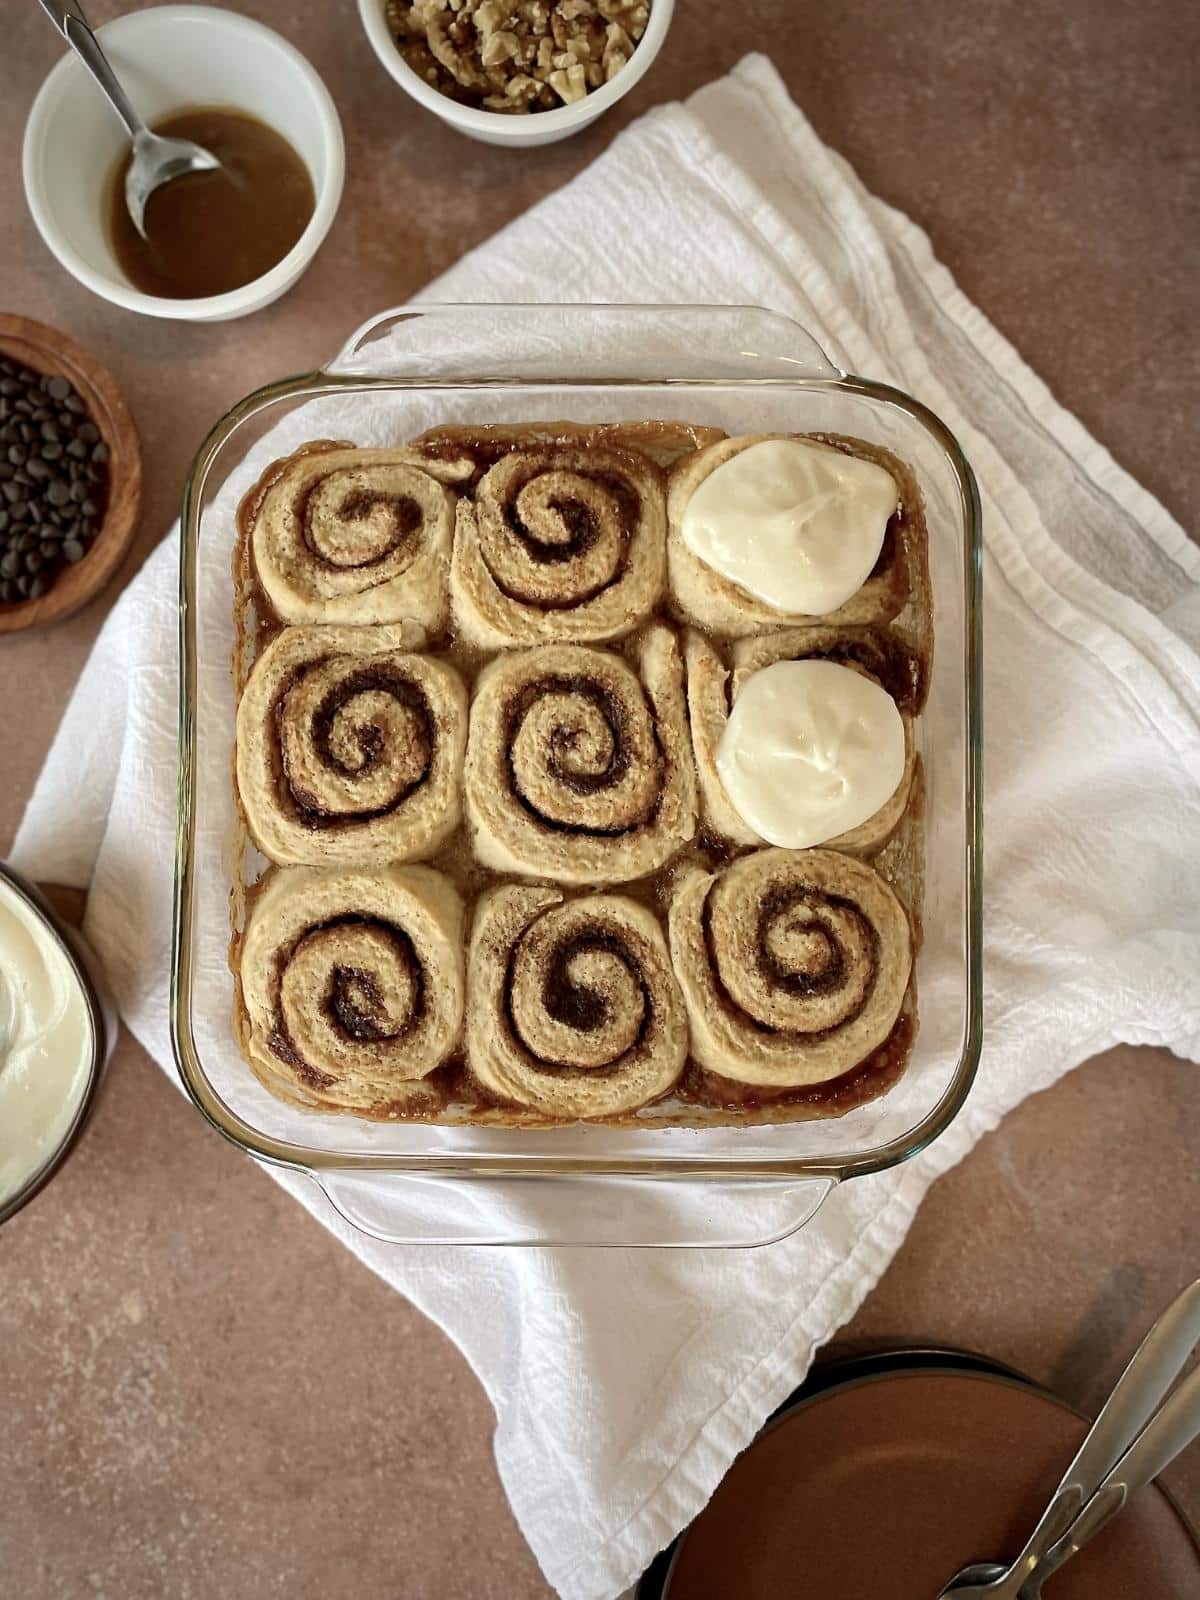 Cinnamon rolls with cream cheese frosting.